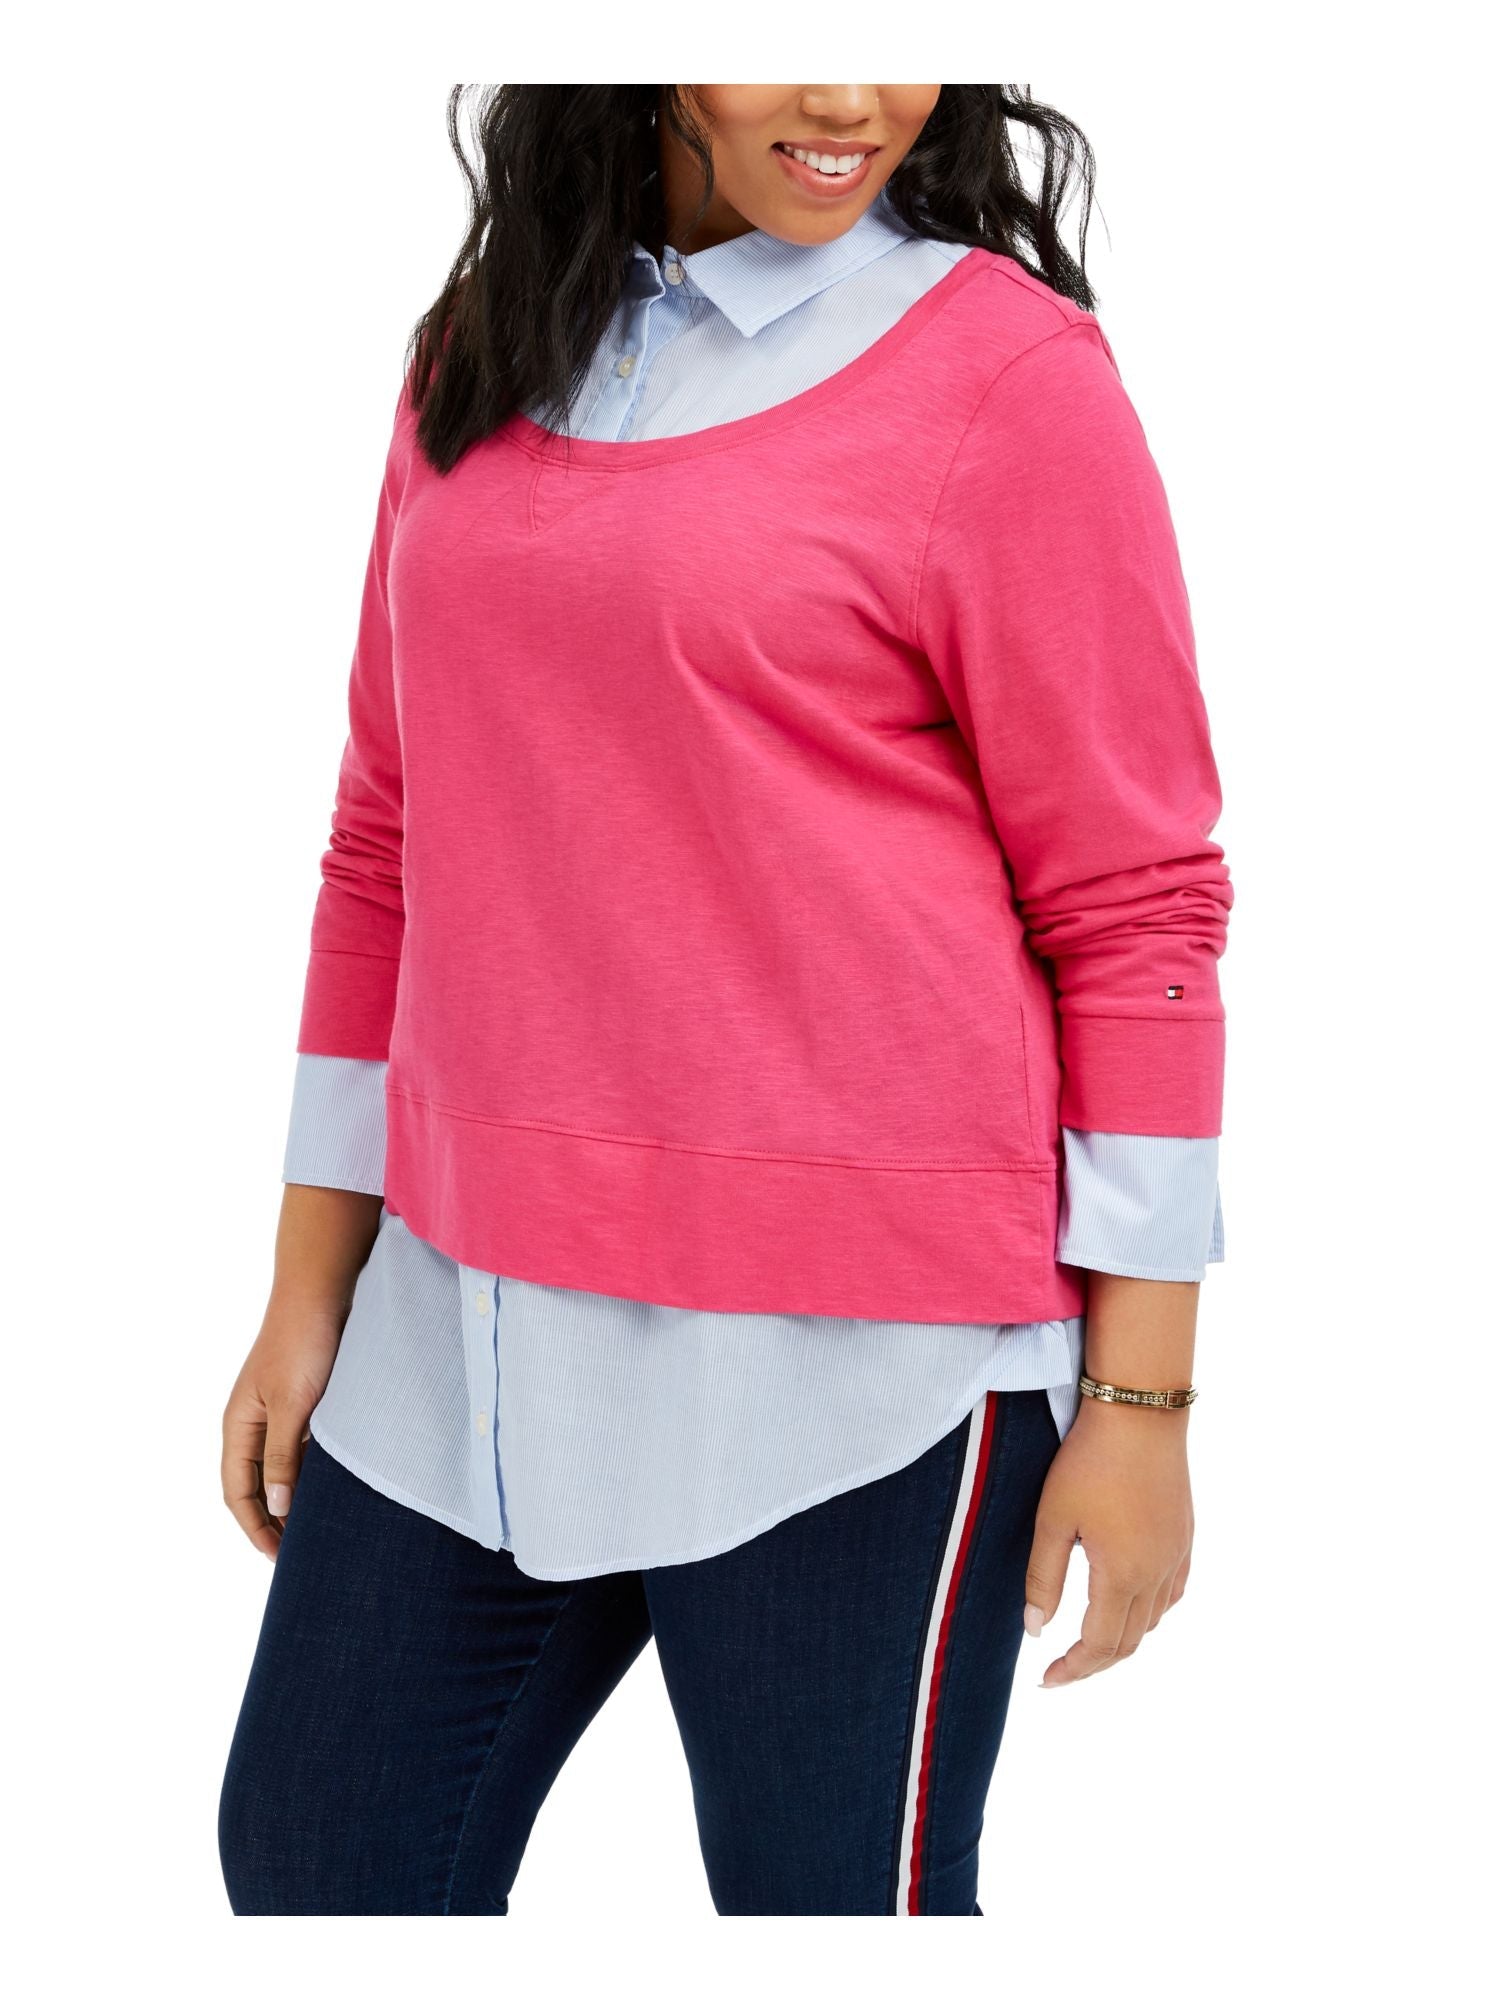 Tommy Hilfiger Women's Long Sleeve Collared Blouse Pink Size 0X